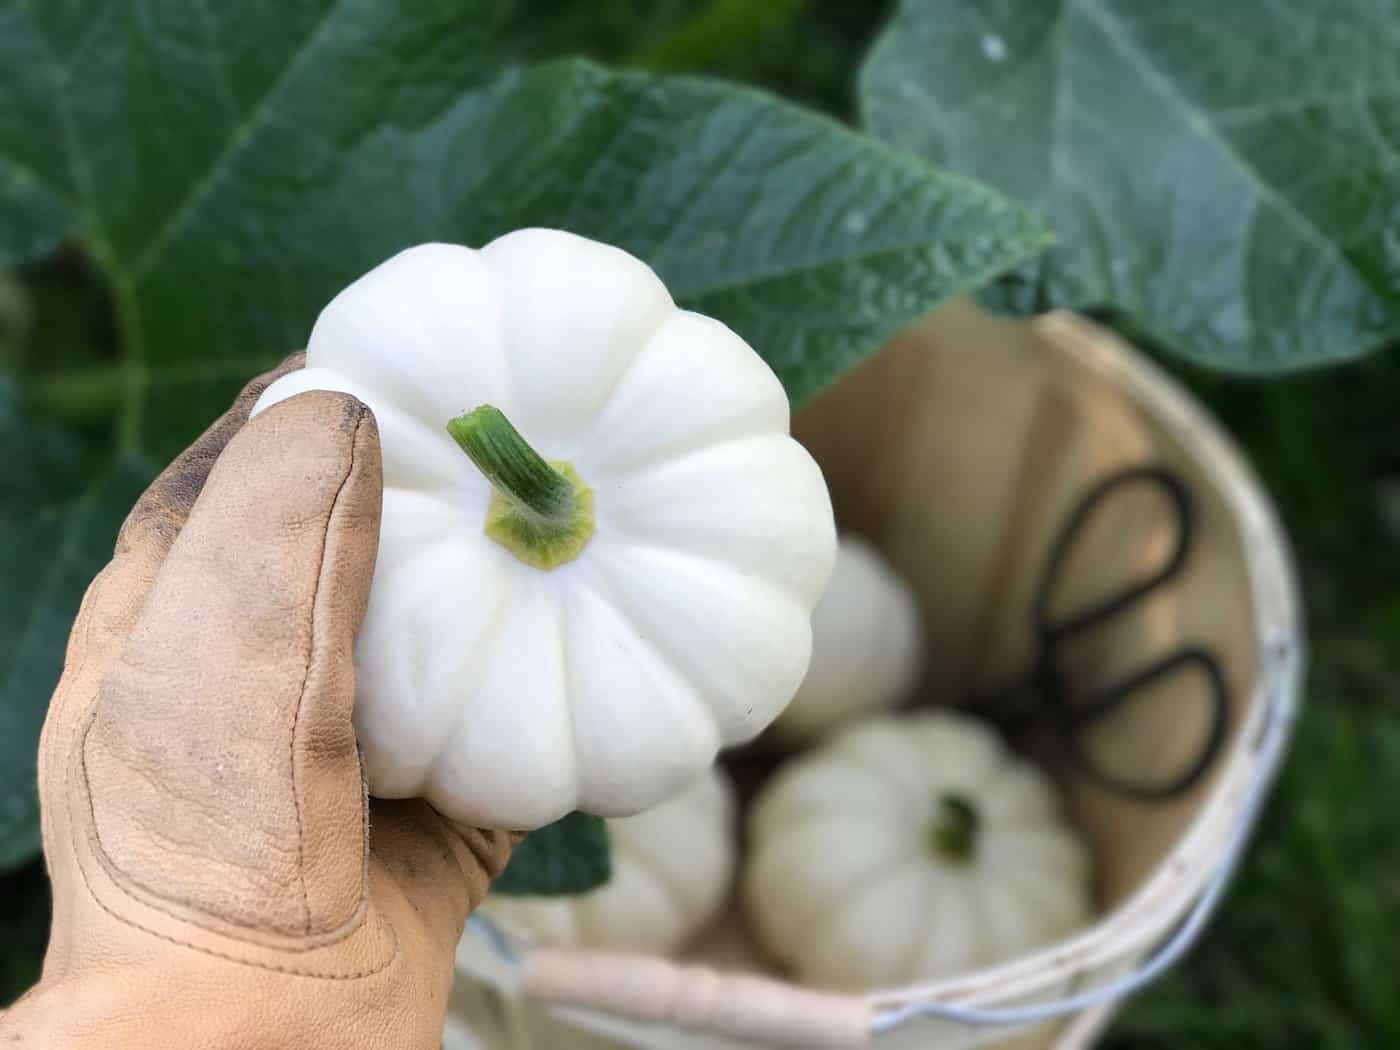 Pumpkins are easy to grow with the right instructions! Here's how to grow organic pumpkins - everything you need to know | home for the harvest #pumpkin #pumpkins #organicpumpkin #organicpumpkins #growpumpkins #howtogrowpumpkins #organicgardening #homefortheharvest